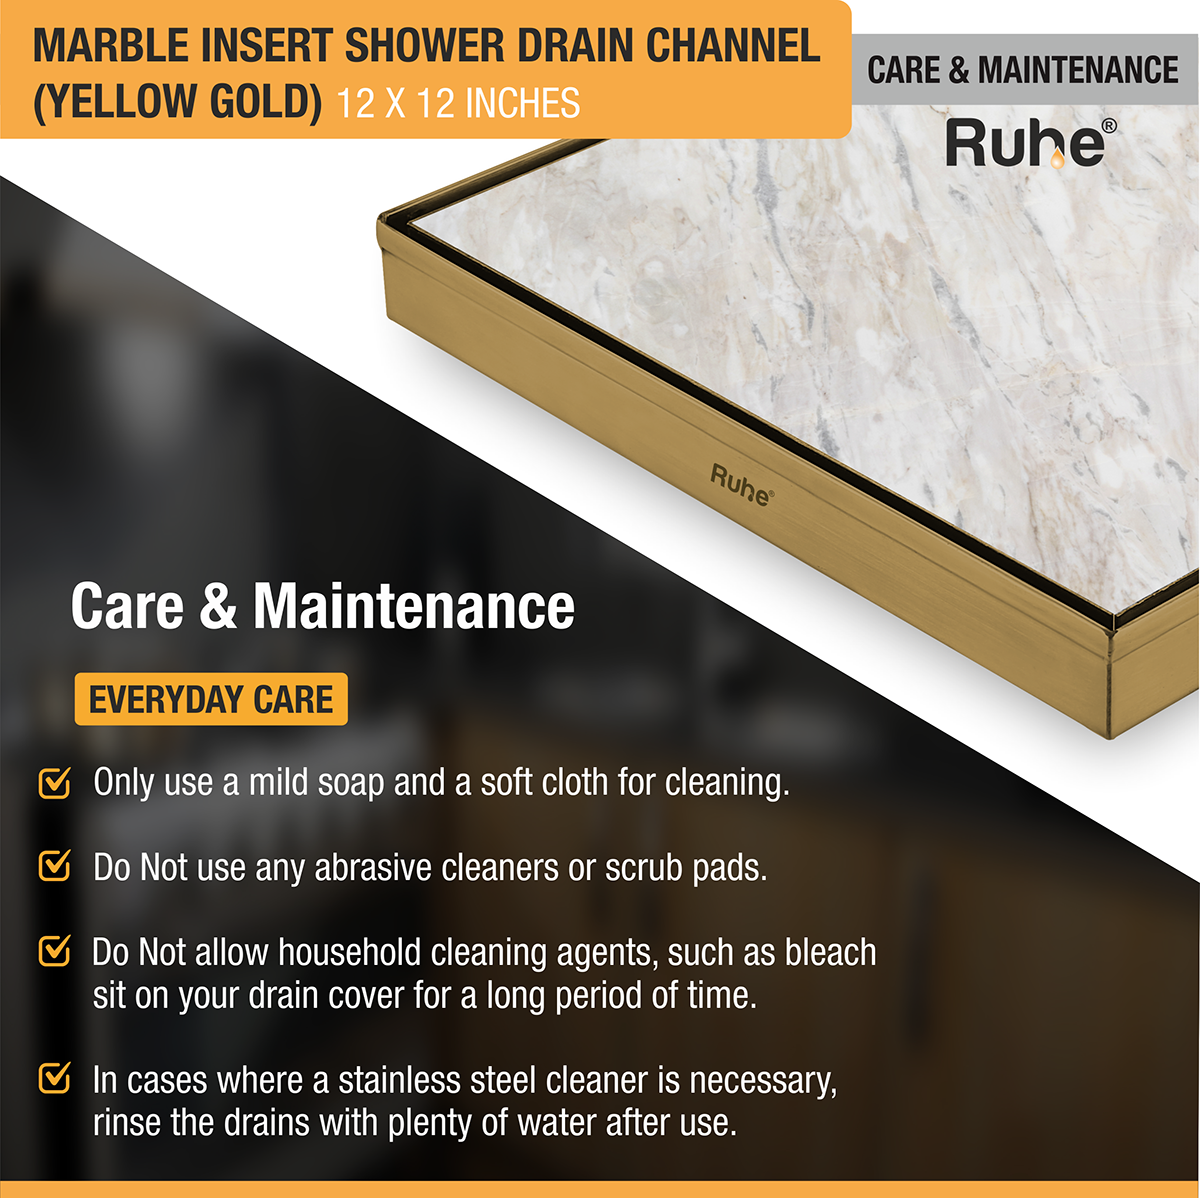 Marble Insert Shower Drain Channel (12 x 12 Inches) YELLOW GOLD PVD Coated care and maintenance